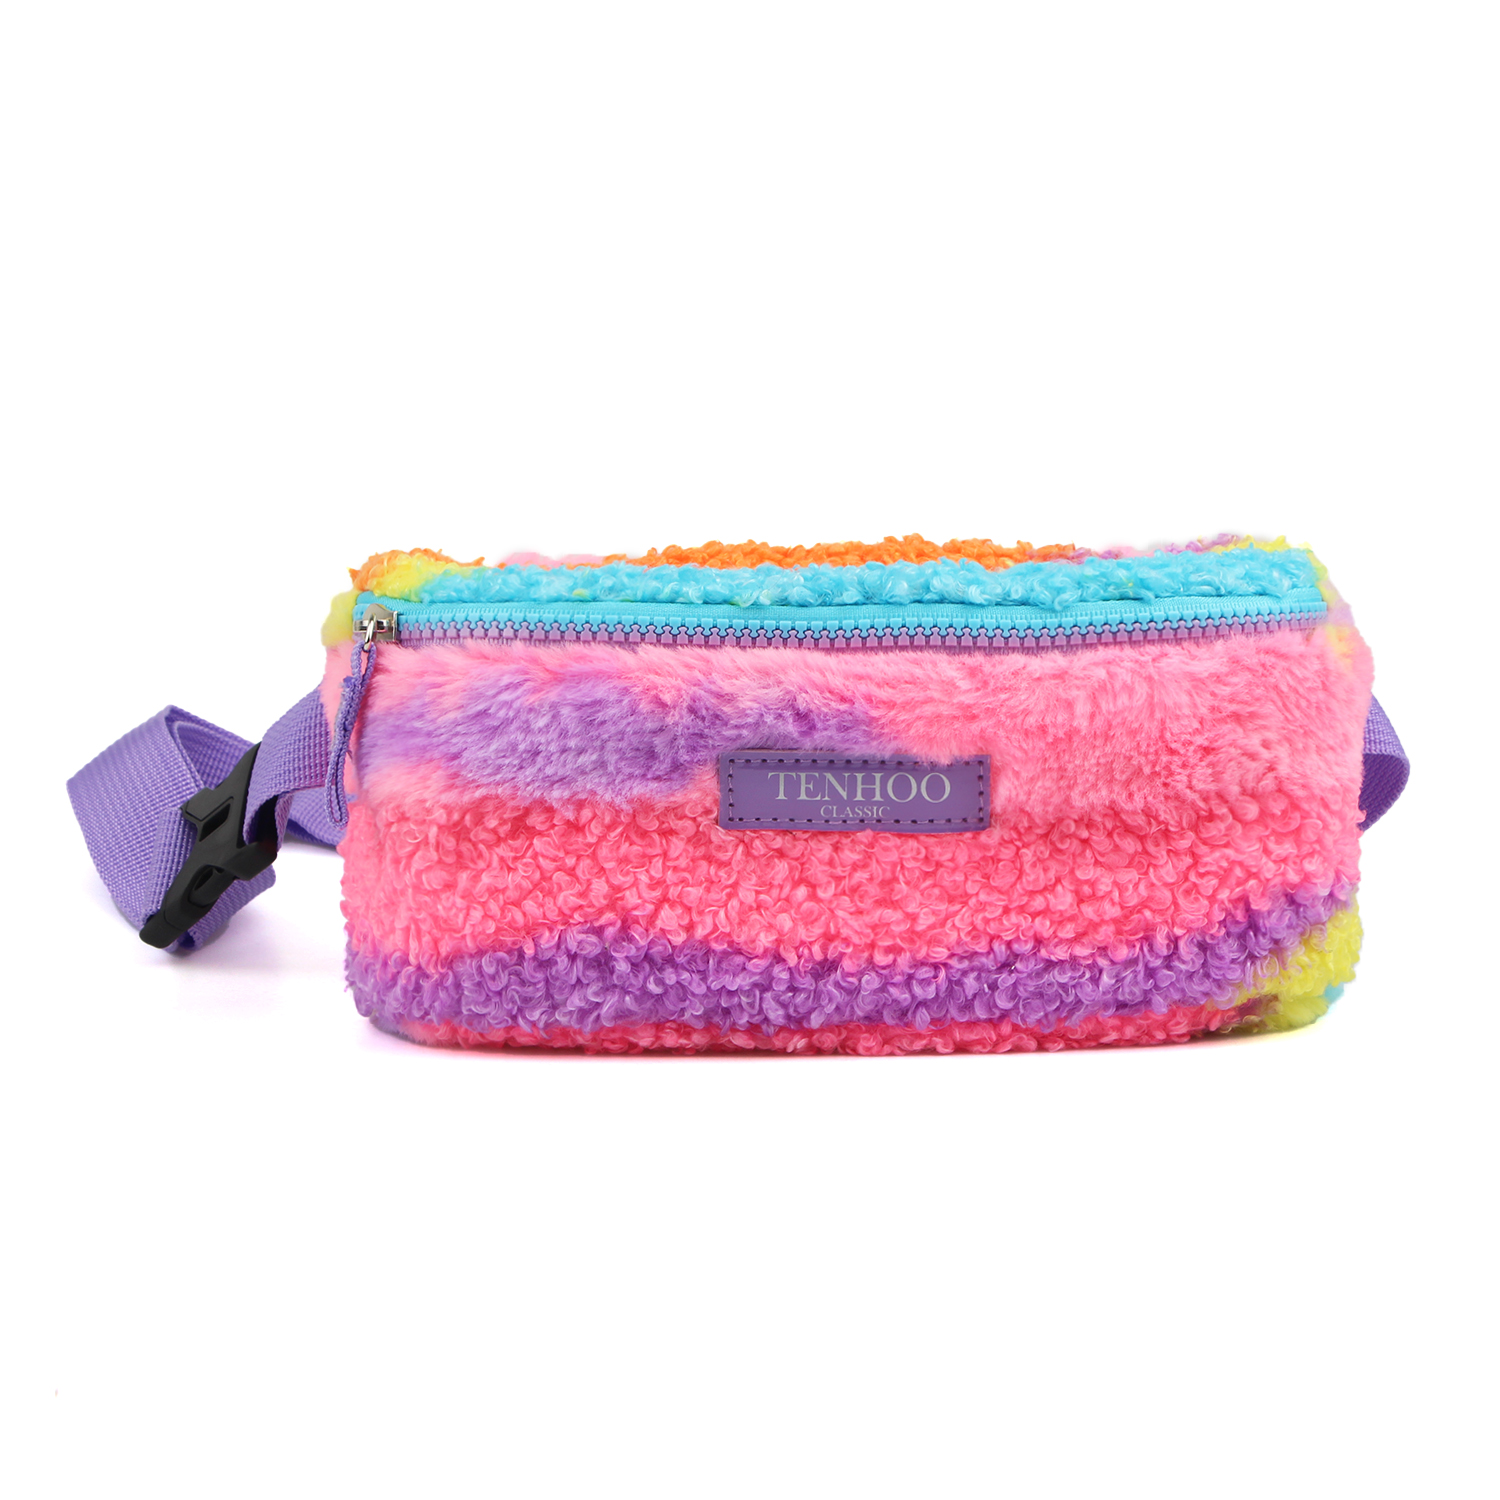 Makeup Bag for Purse Makeup Pouches for Women Aesthetic Cosmetic Bag Cute Pencil Case Travel Toiletry Bag Fuzzy Makeup Bag Makeup Brushes Storage Zipper Pouches for Organizing